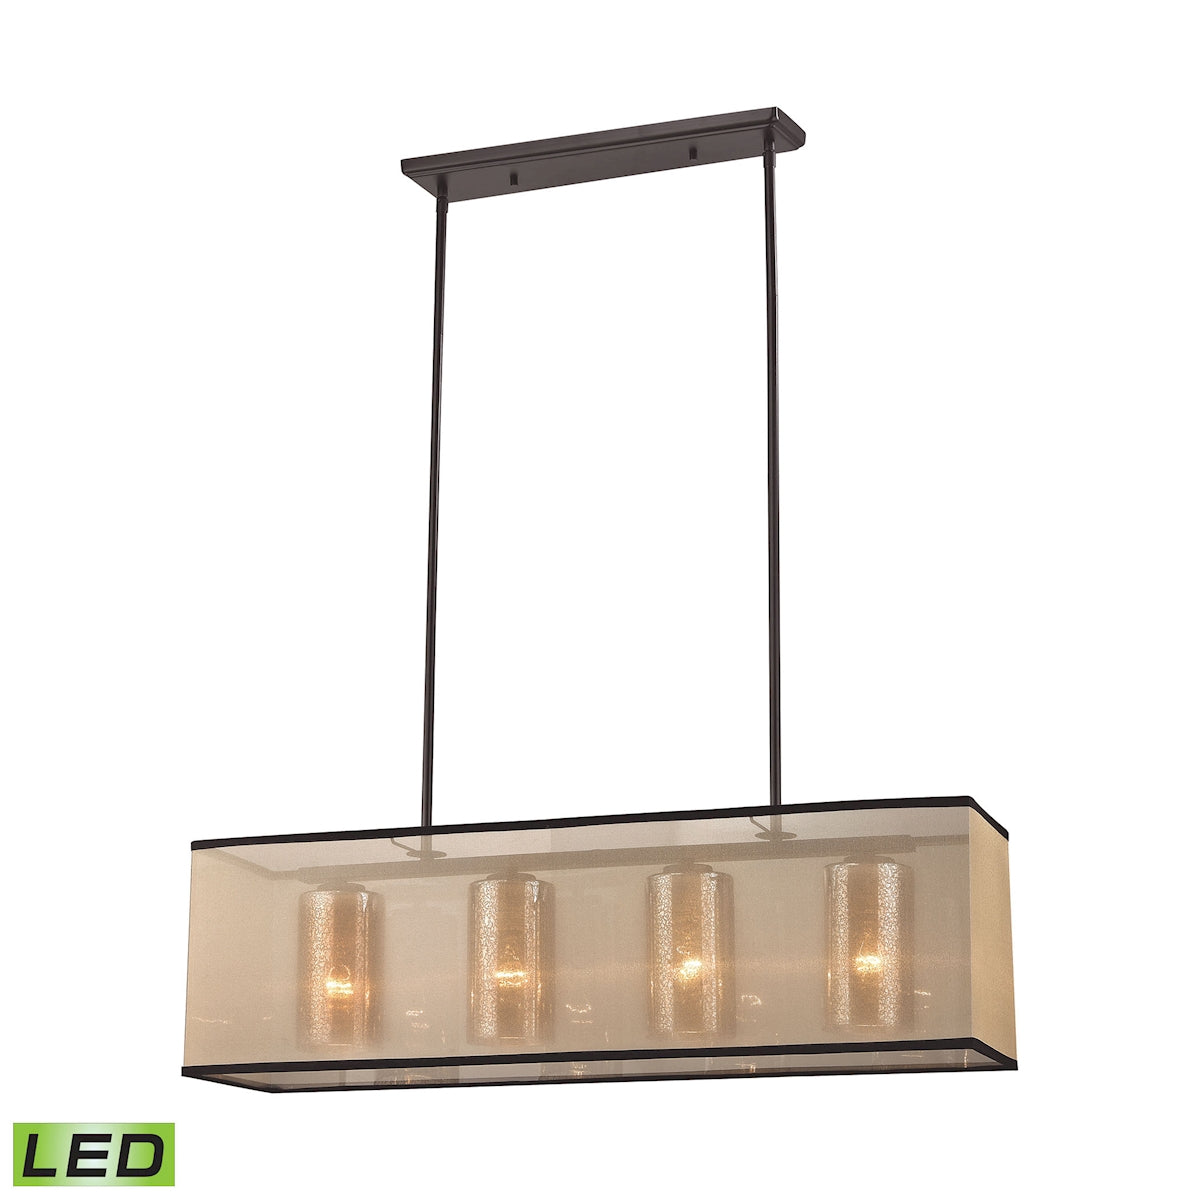 ELK Lighting 57028/4-LED Diffusion 4-Light Chandelier in Oiled Bronze with Organza and Mercury Glass - Includes LED Bulbs